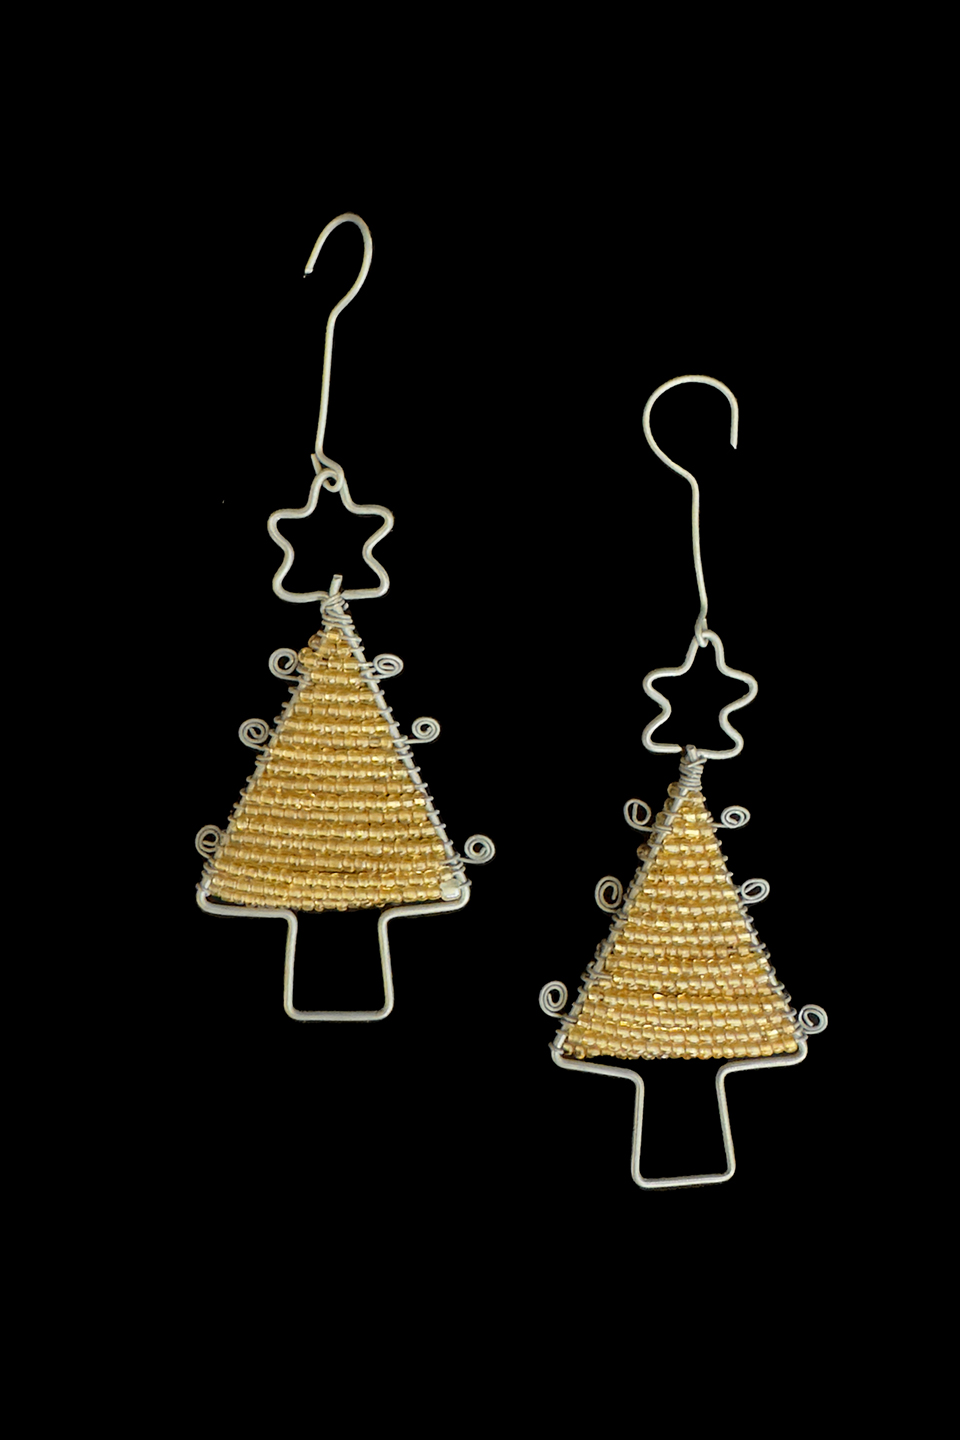 2 x Bead and Wire  Christmas Tree Ornaments - South Africa (only 1 set)